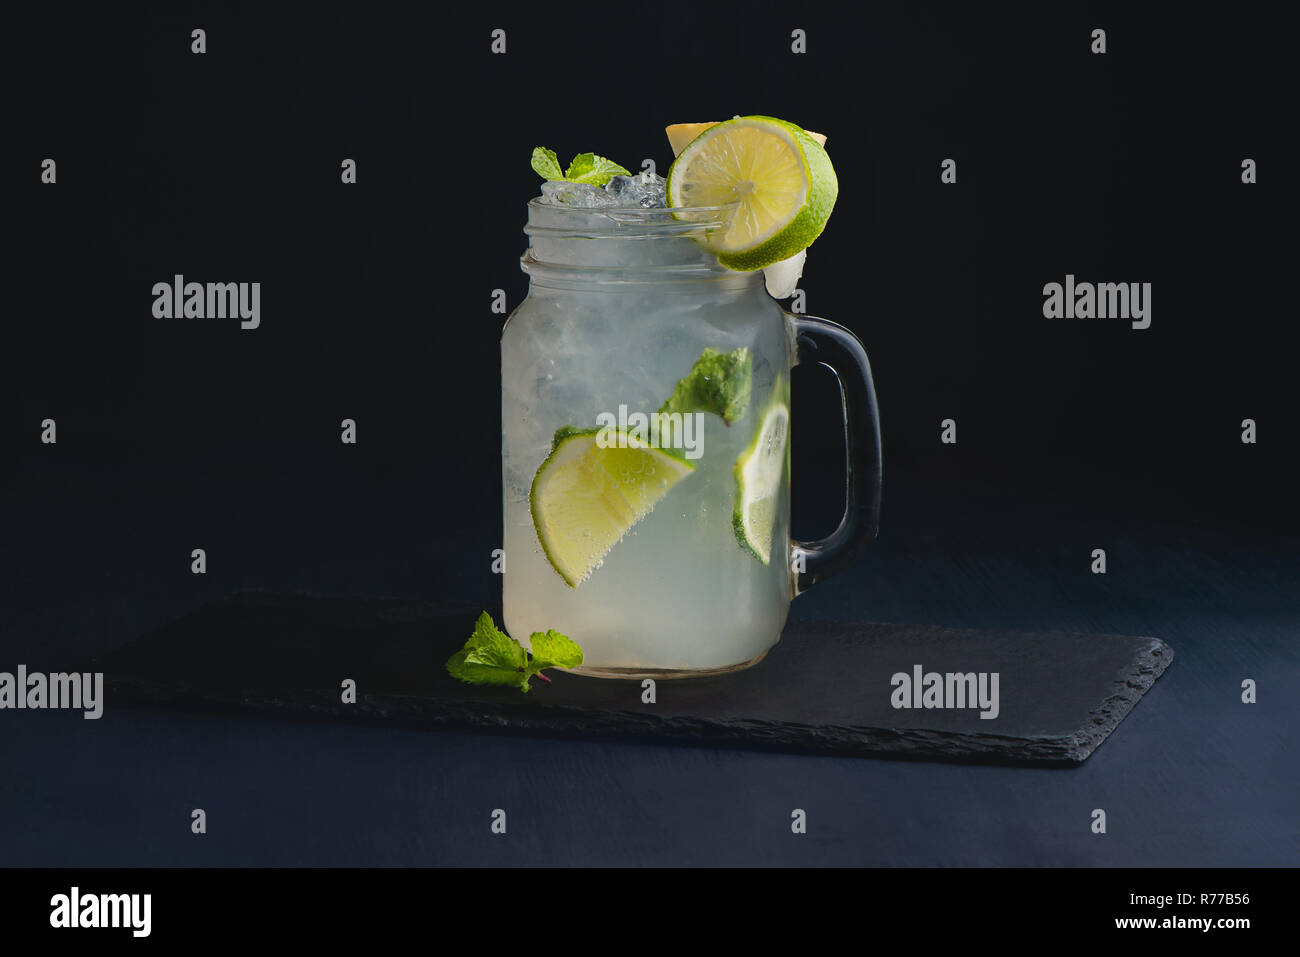 Ice cold classic lime lemonade in a vintage glass mason jar. Dark background with copy space for a menu. Stock Photo